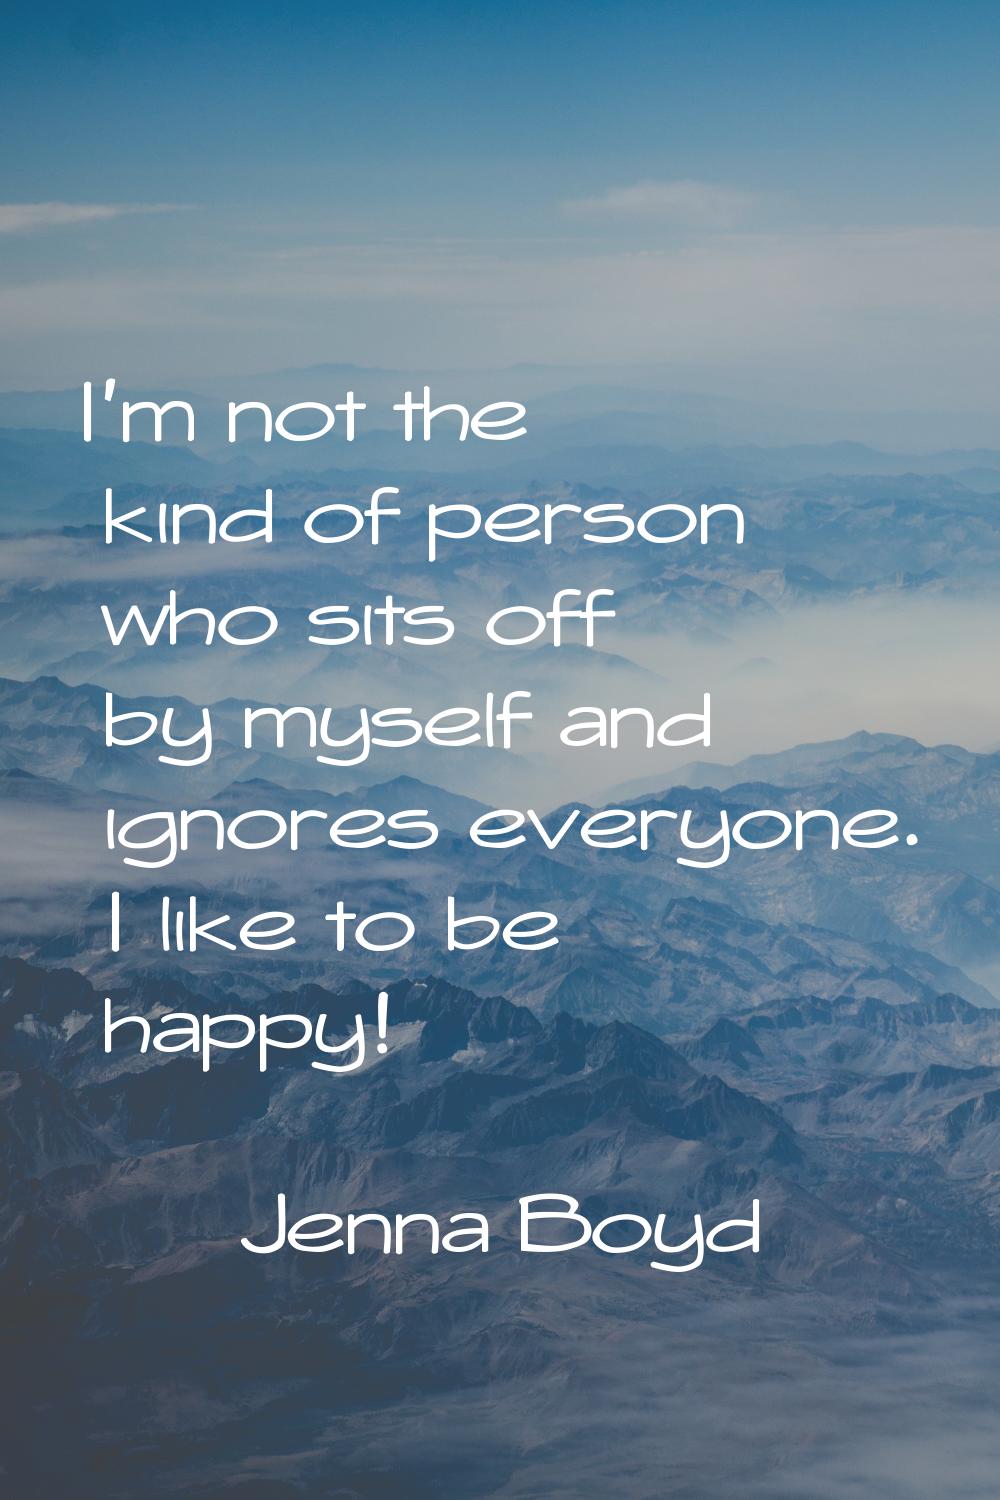 I'm not the kind of person who sits off by myself and ignores everyone. I like to be happy!